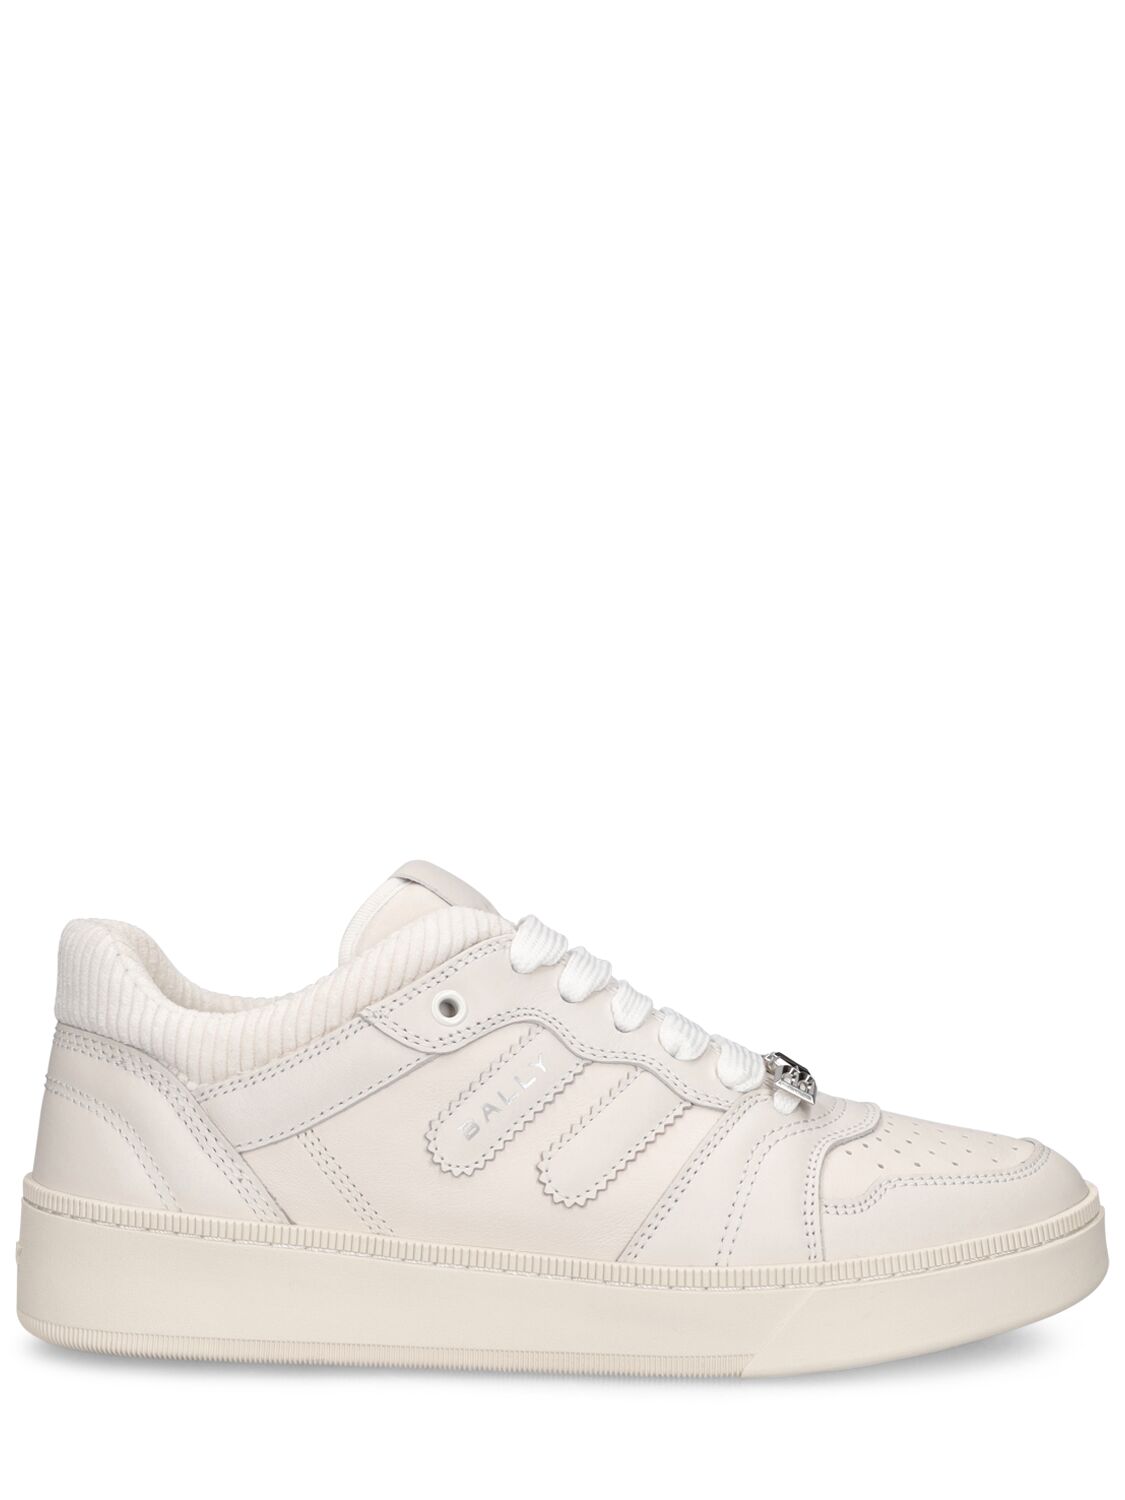 Bally Royalty Leather Low Sneakers In White